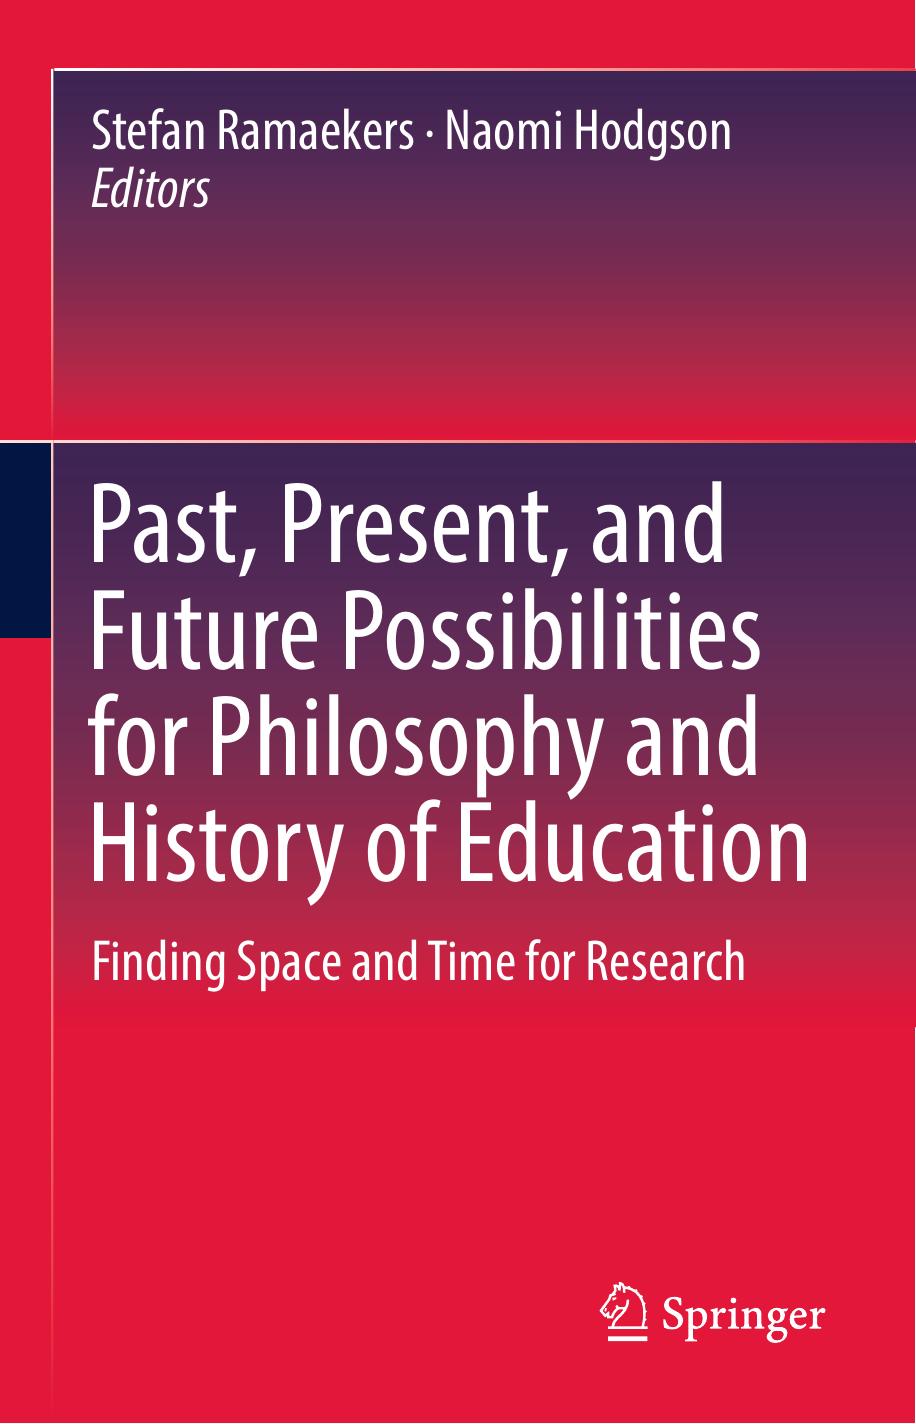 Past, Present, and Future Possibilities for Philosophy and History of Education  Finding Space and Time for Research (2018)